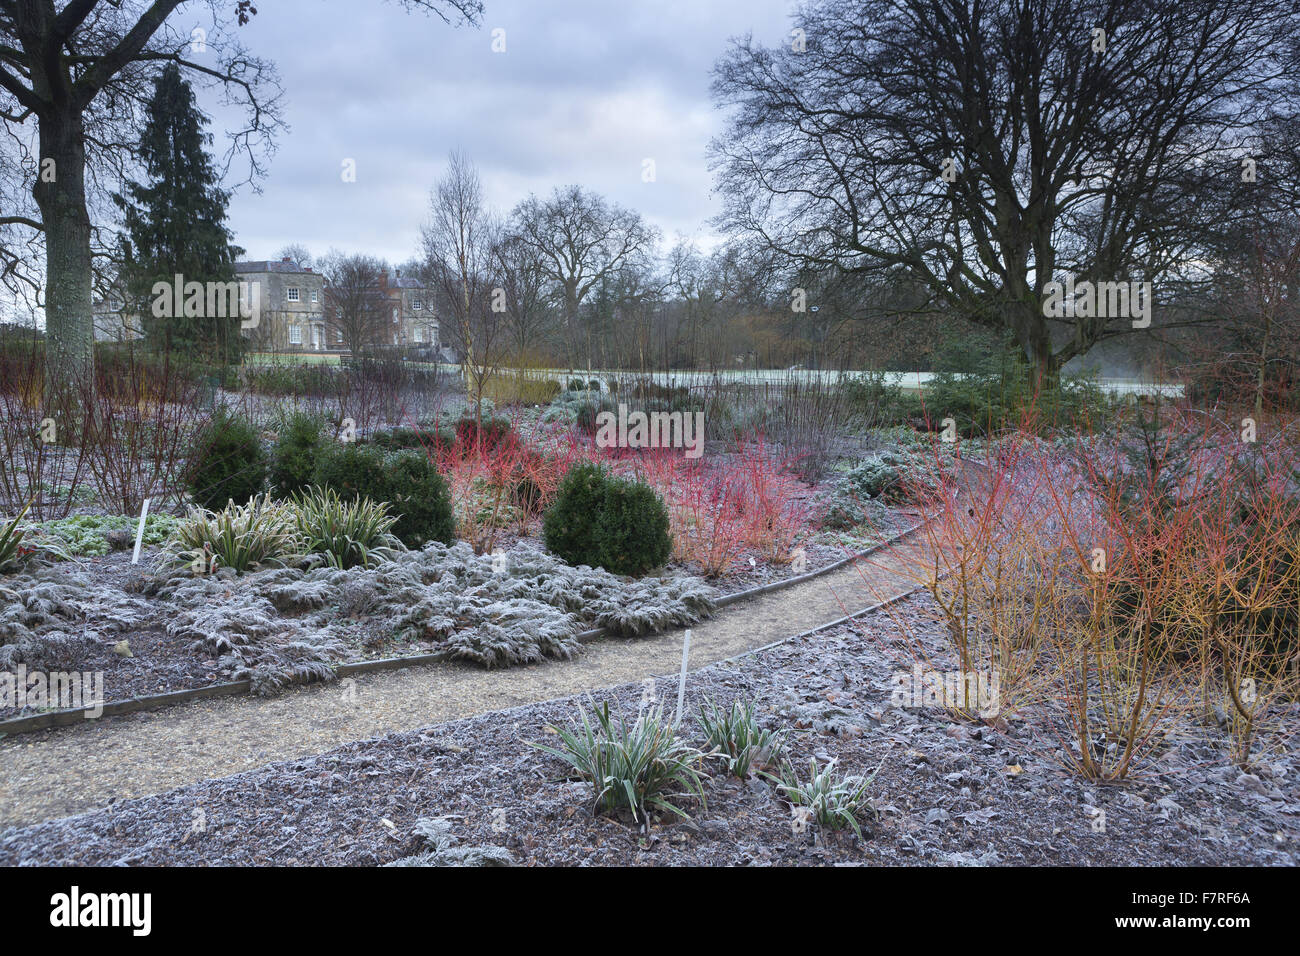 The gardens at Mottisfont, Hampshire, in the winter. The garden features ancient trees, babbling brooks and rolling lawns. Stock Photo